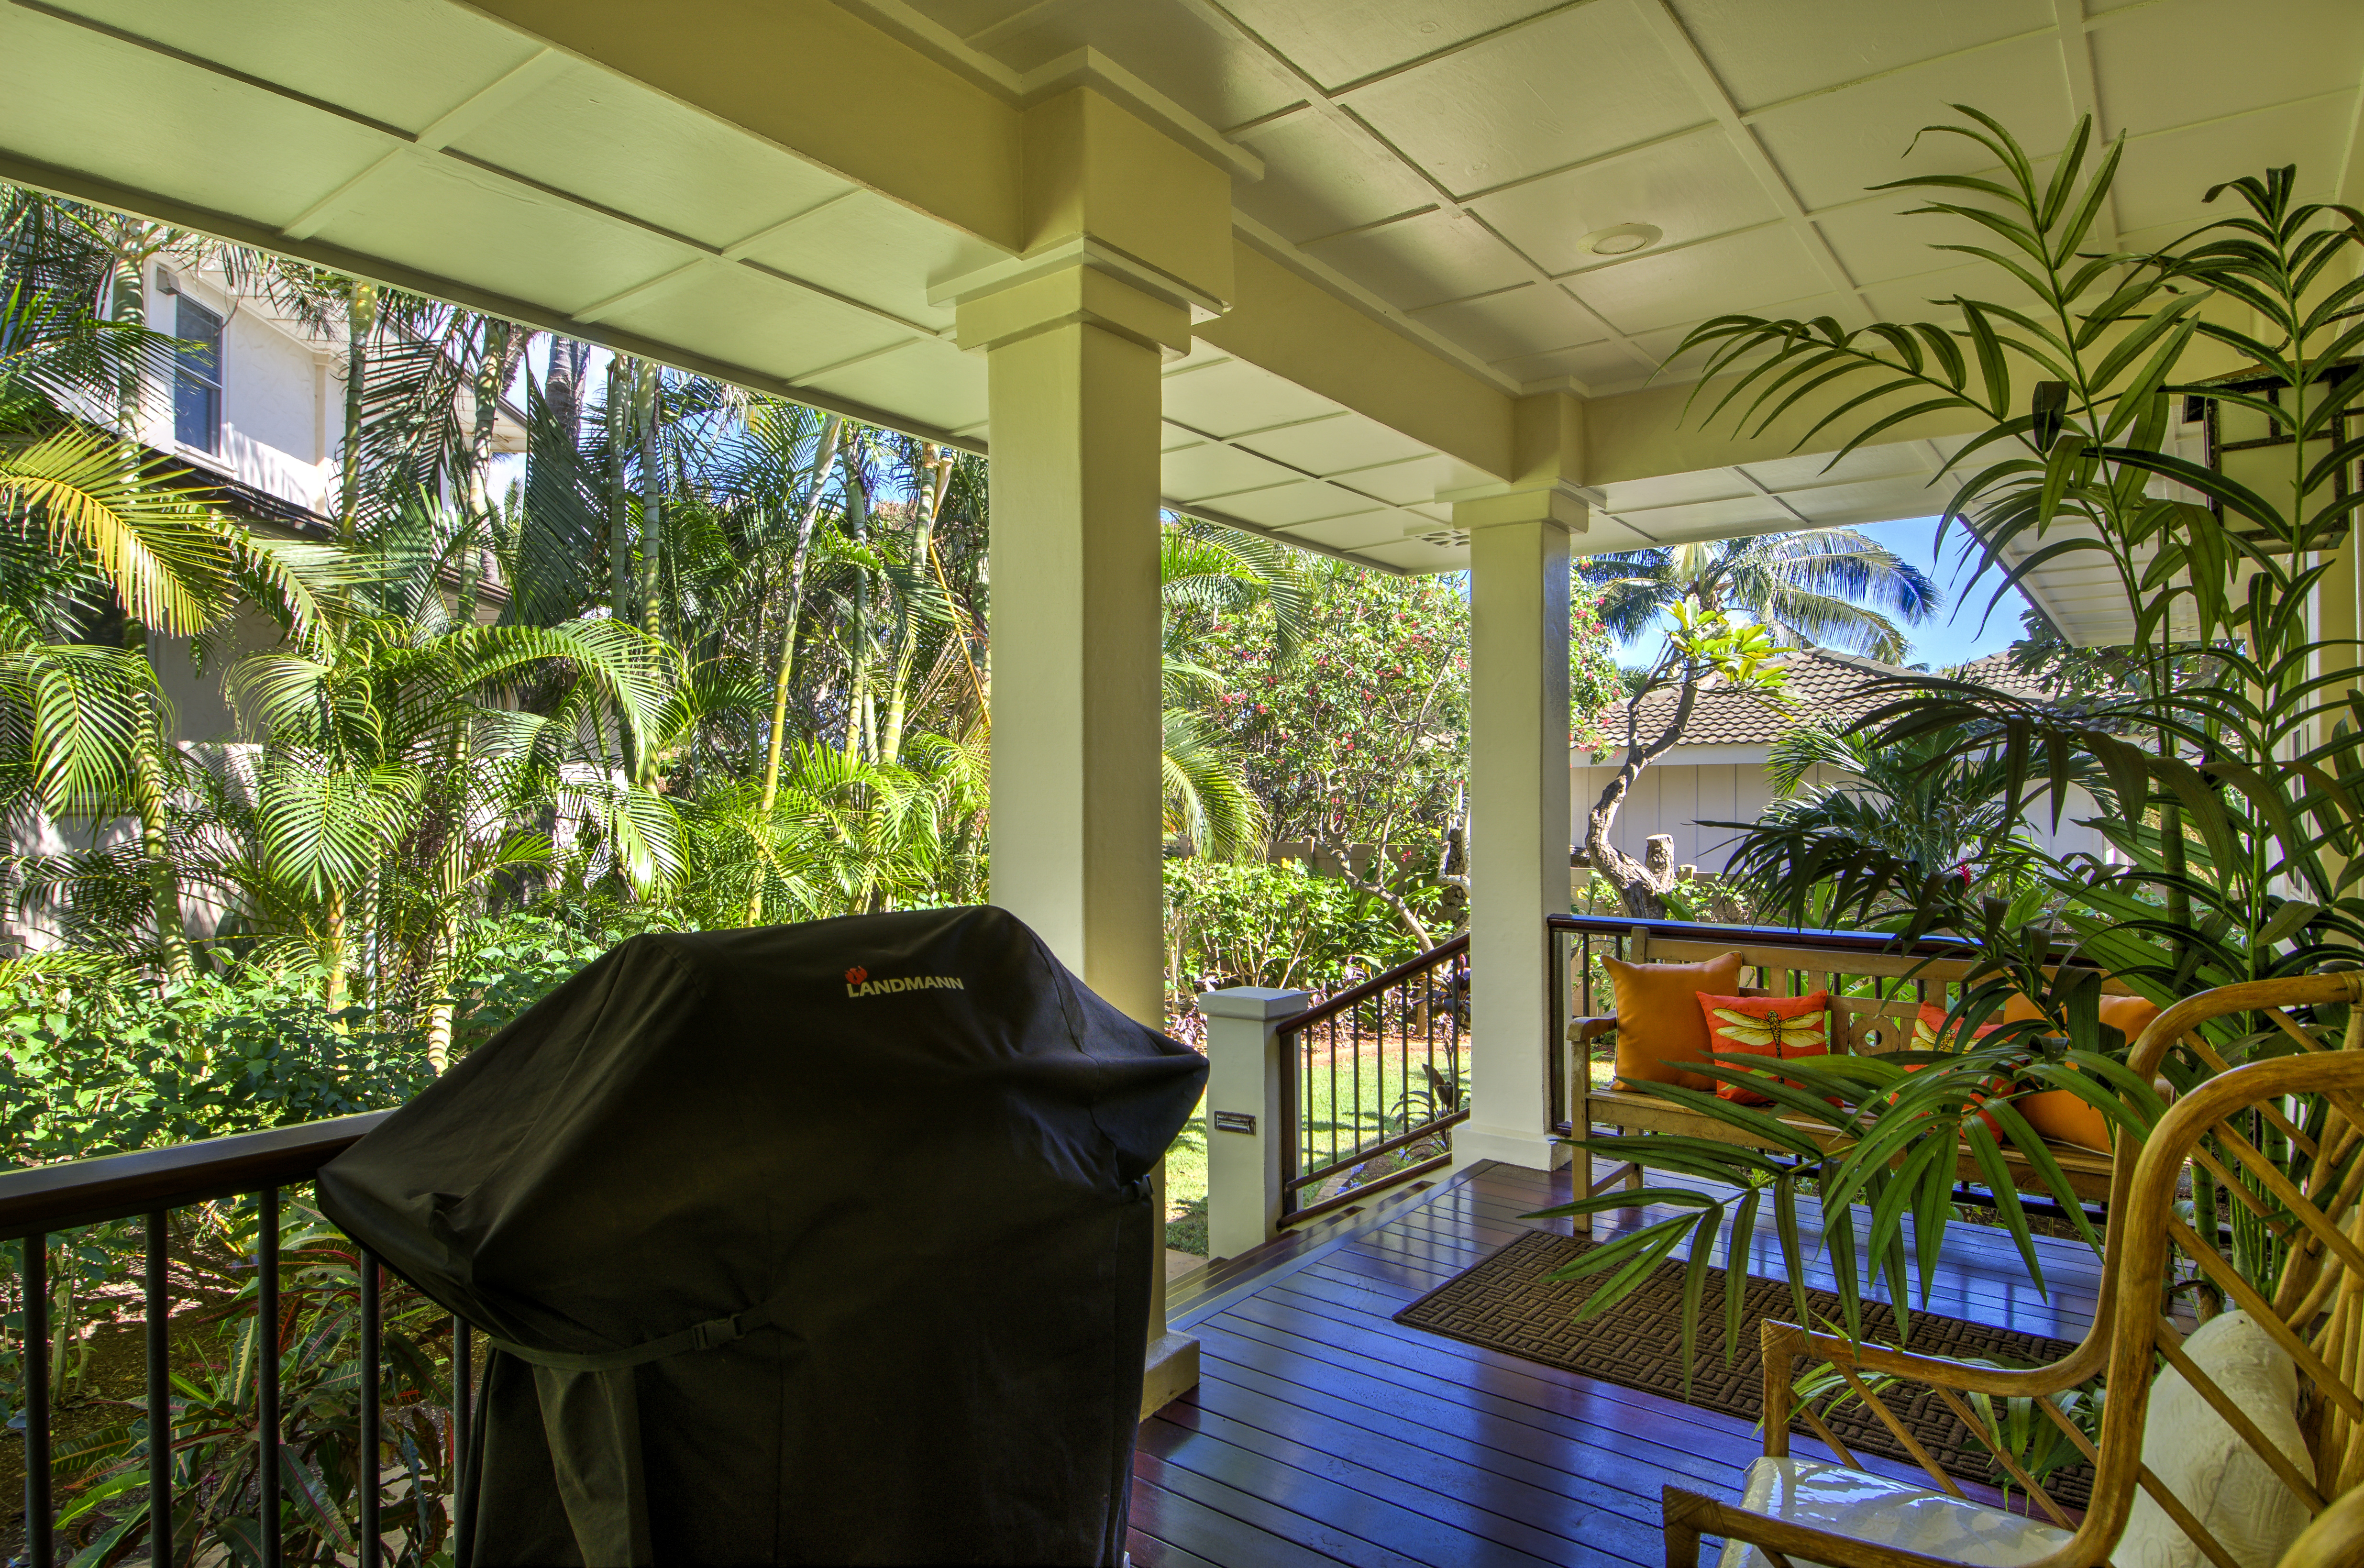 From the back entry, Honu La'e has a covered porch with plenty of seating and a BBQ grill.